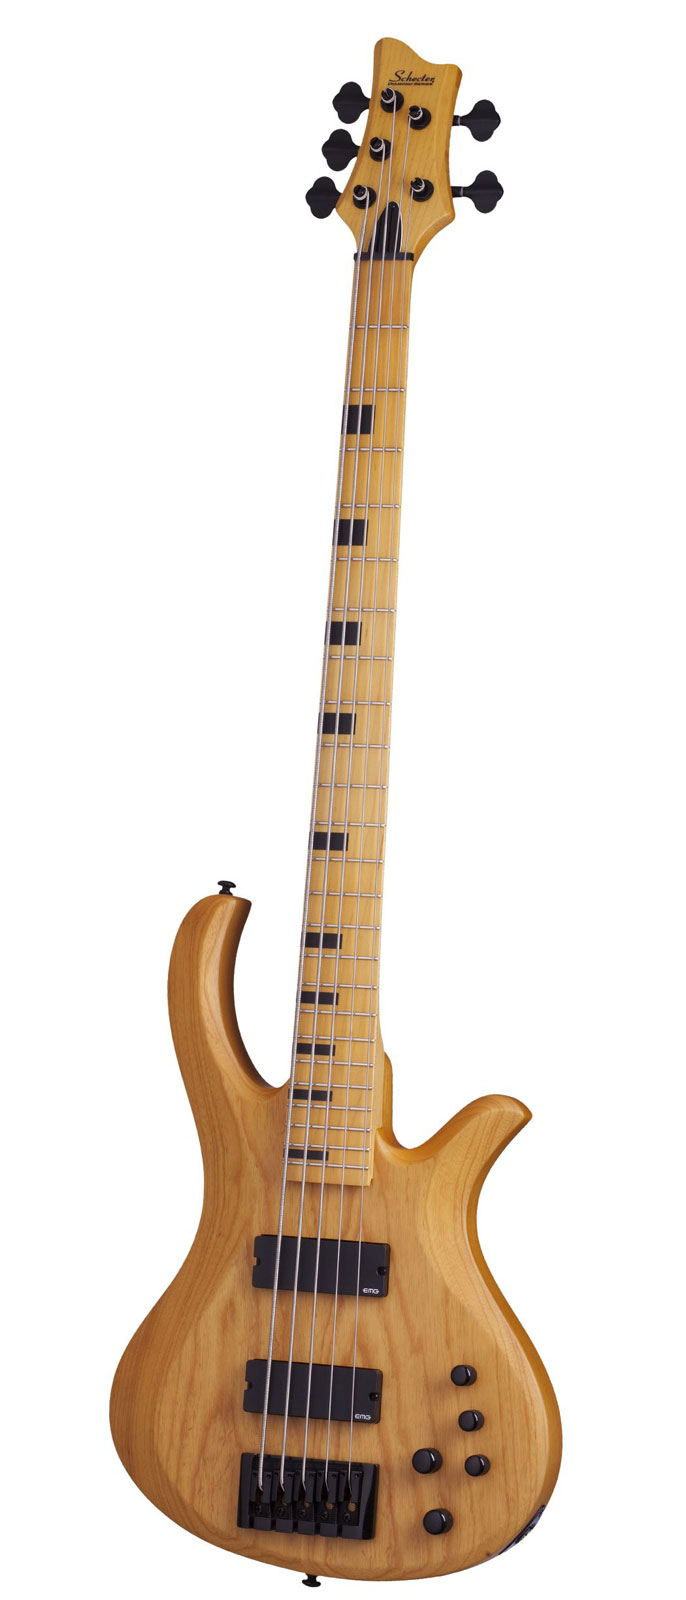 SCHECTER RIOT 5 SESSION LH AGED NATURAL SATIN